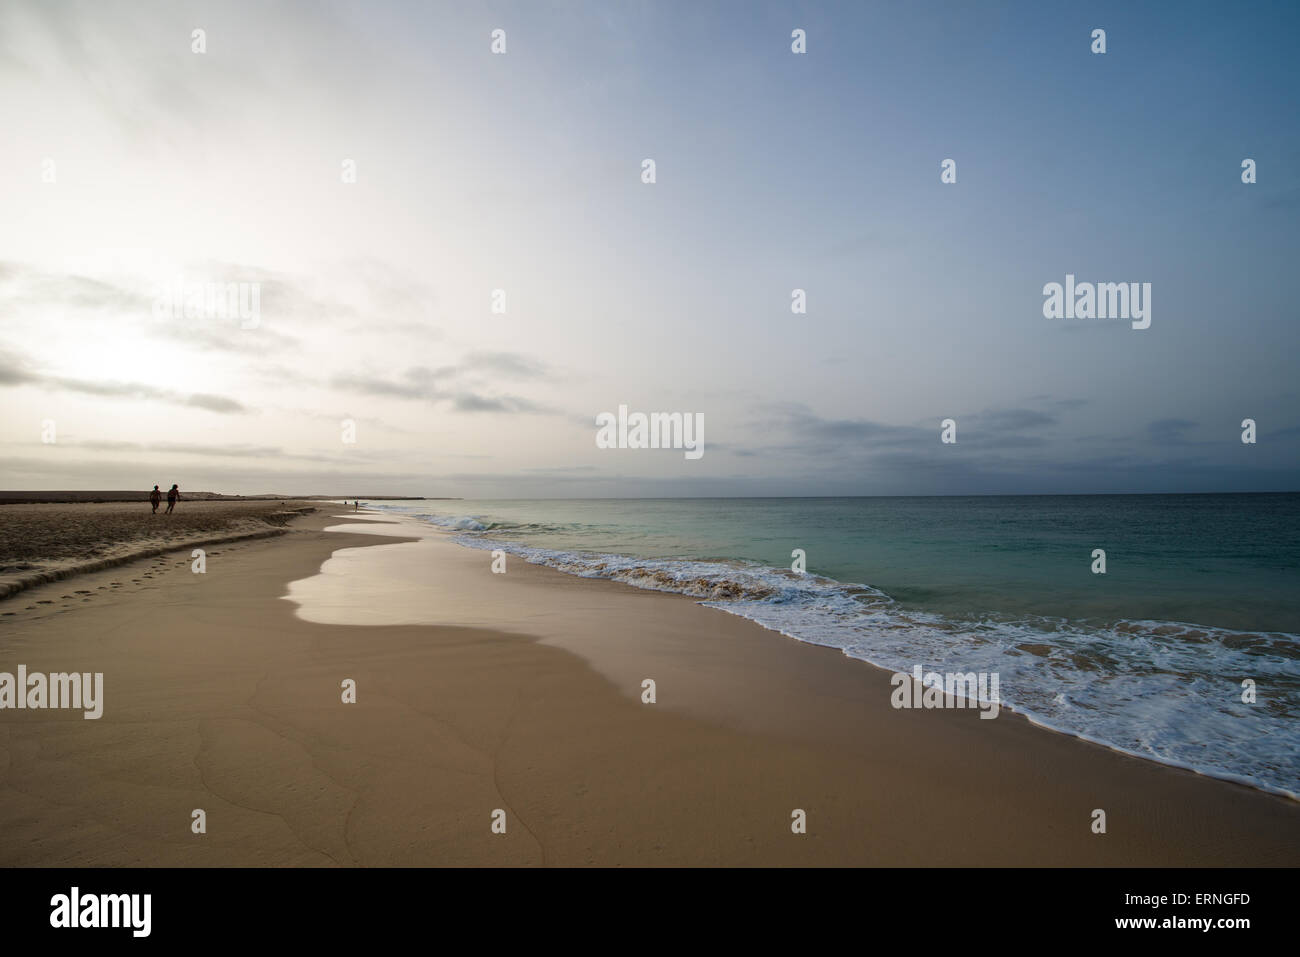 beautiful evening view on the beach Stock Photo